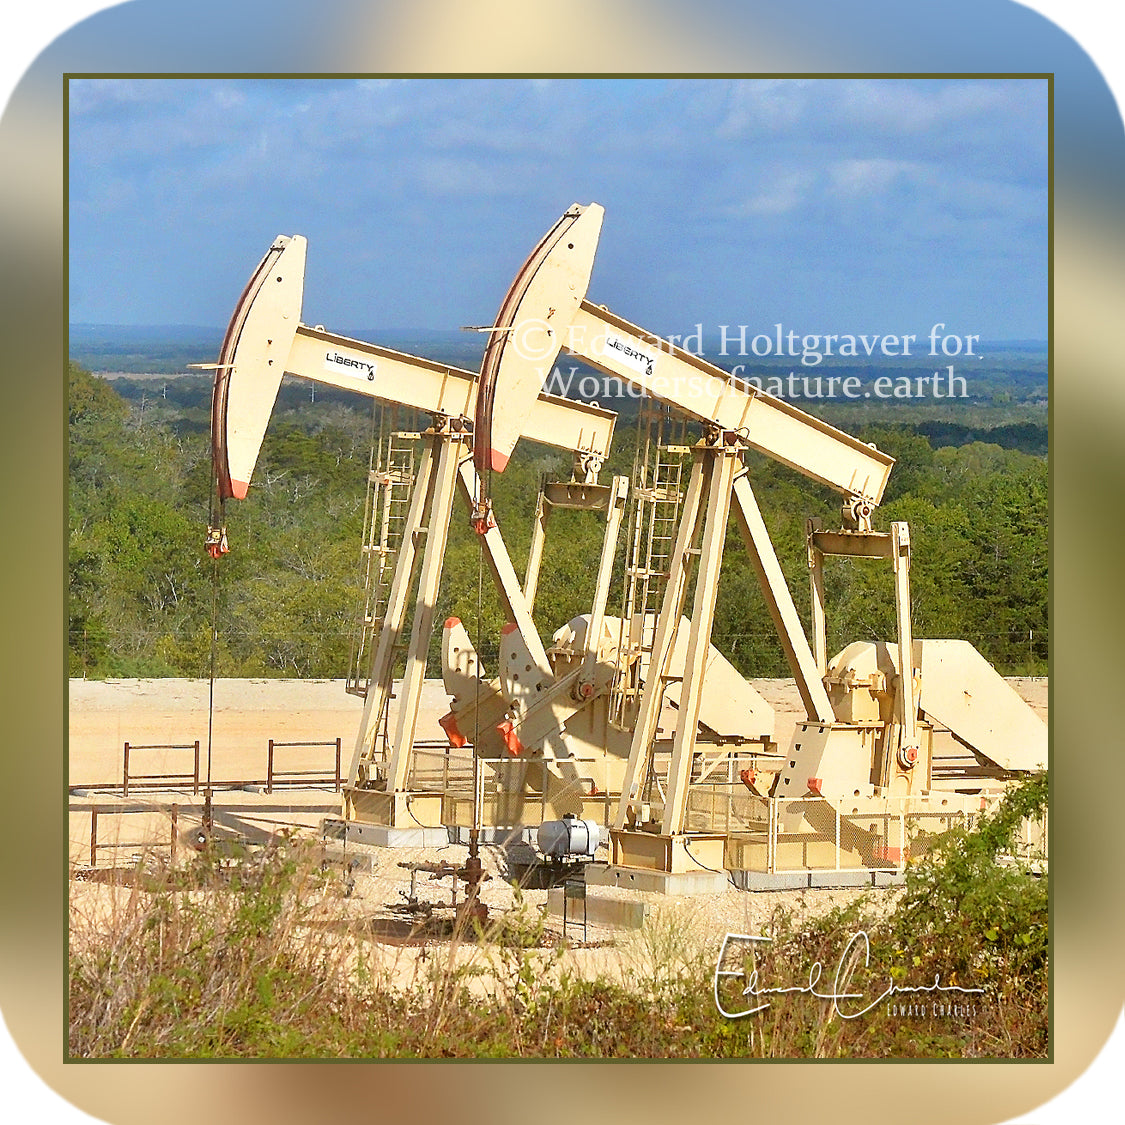 Structures - Oil Field